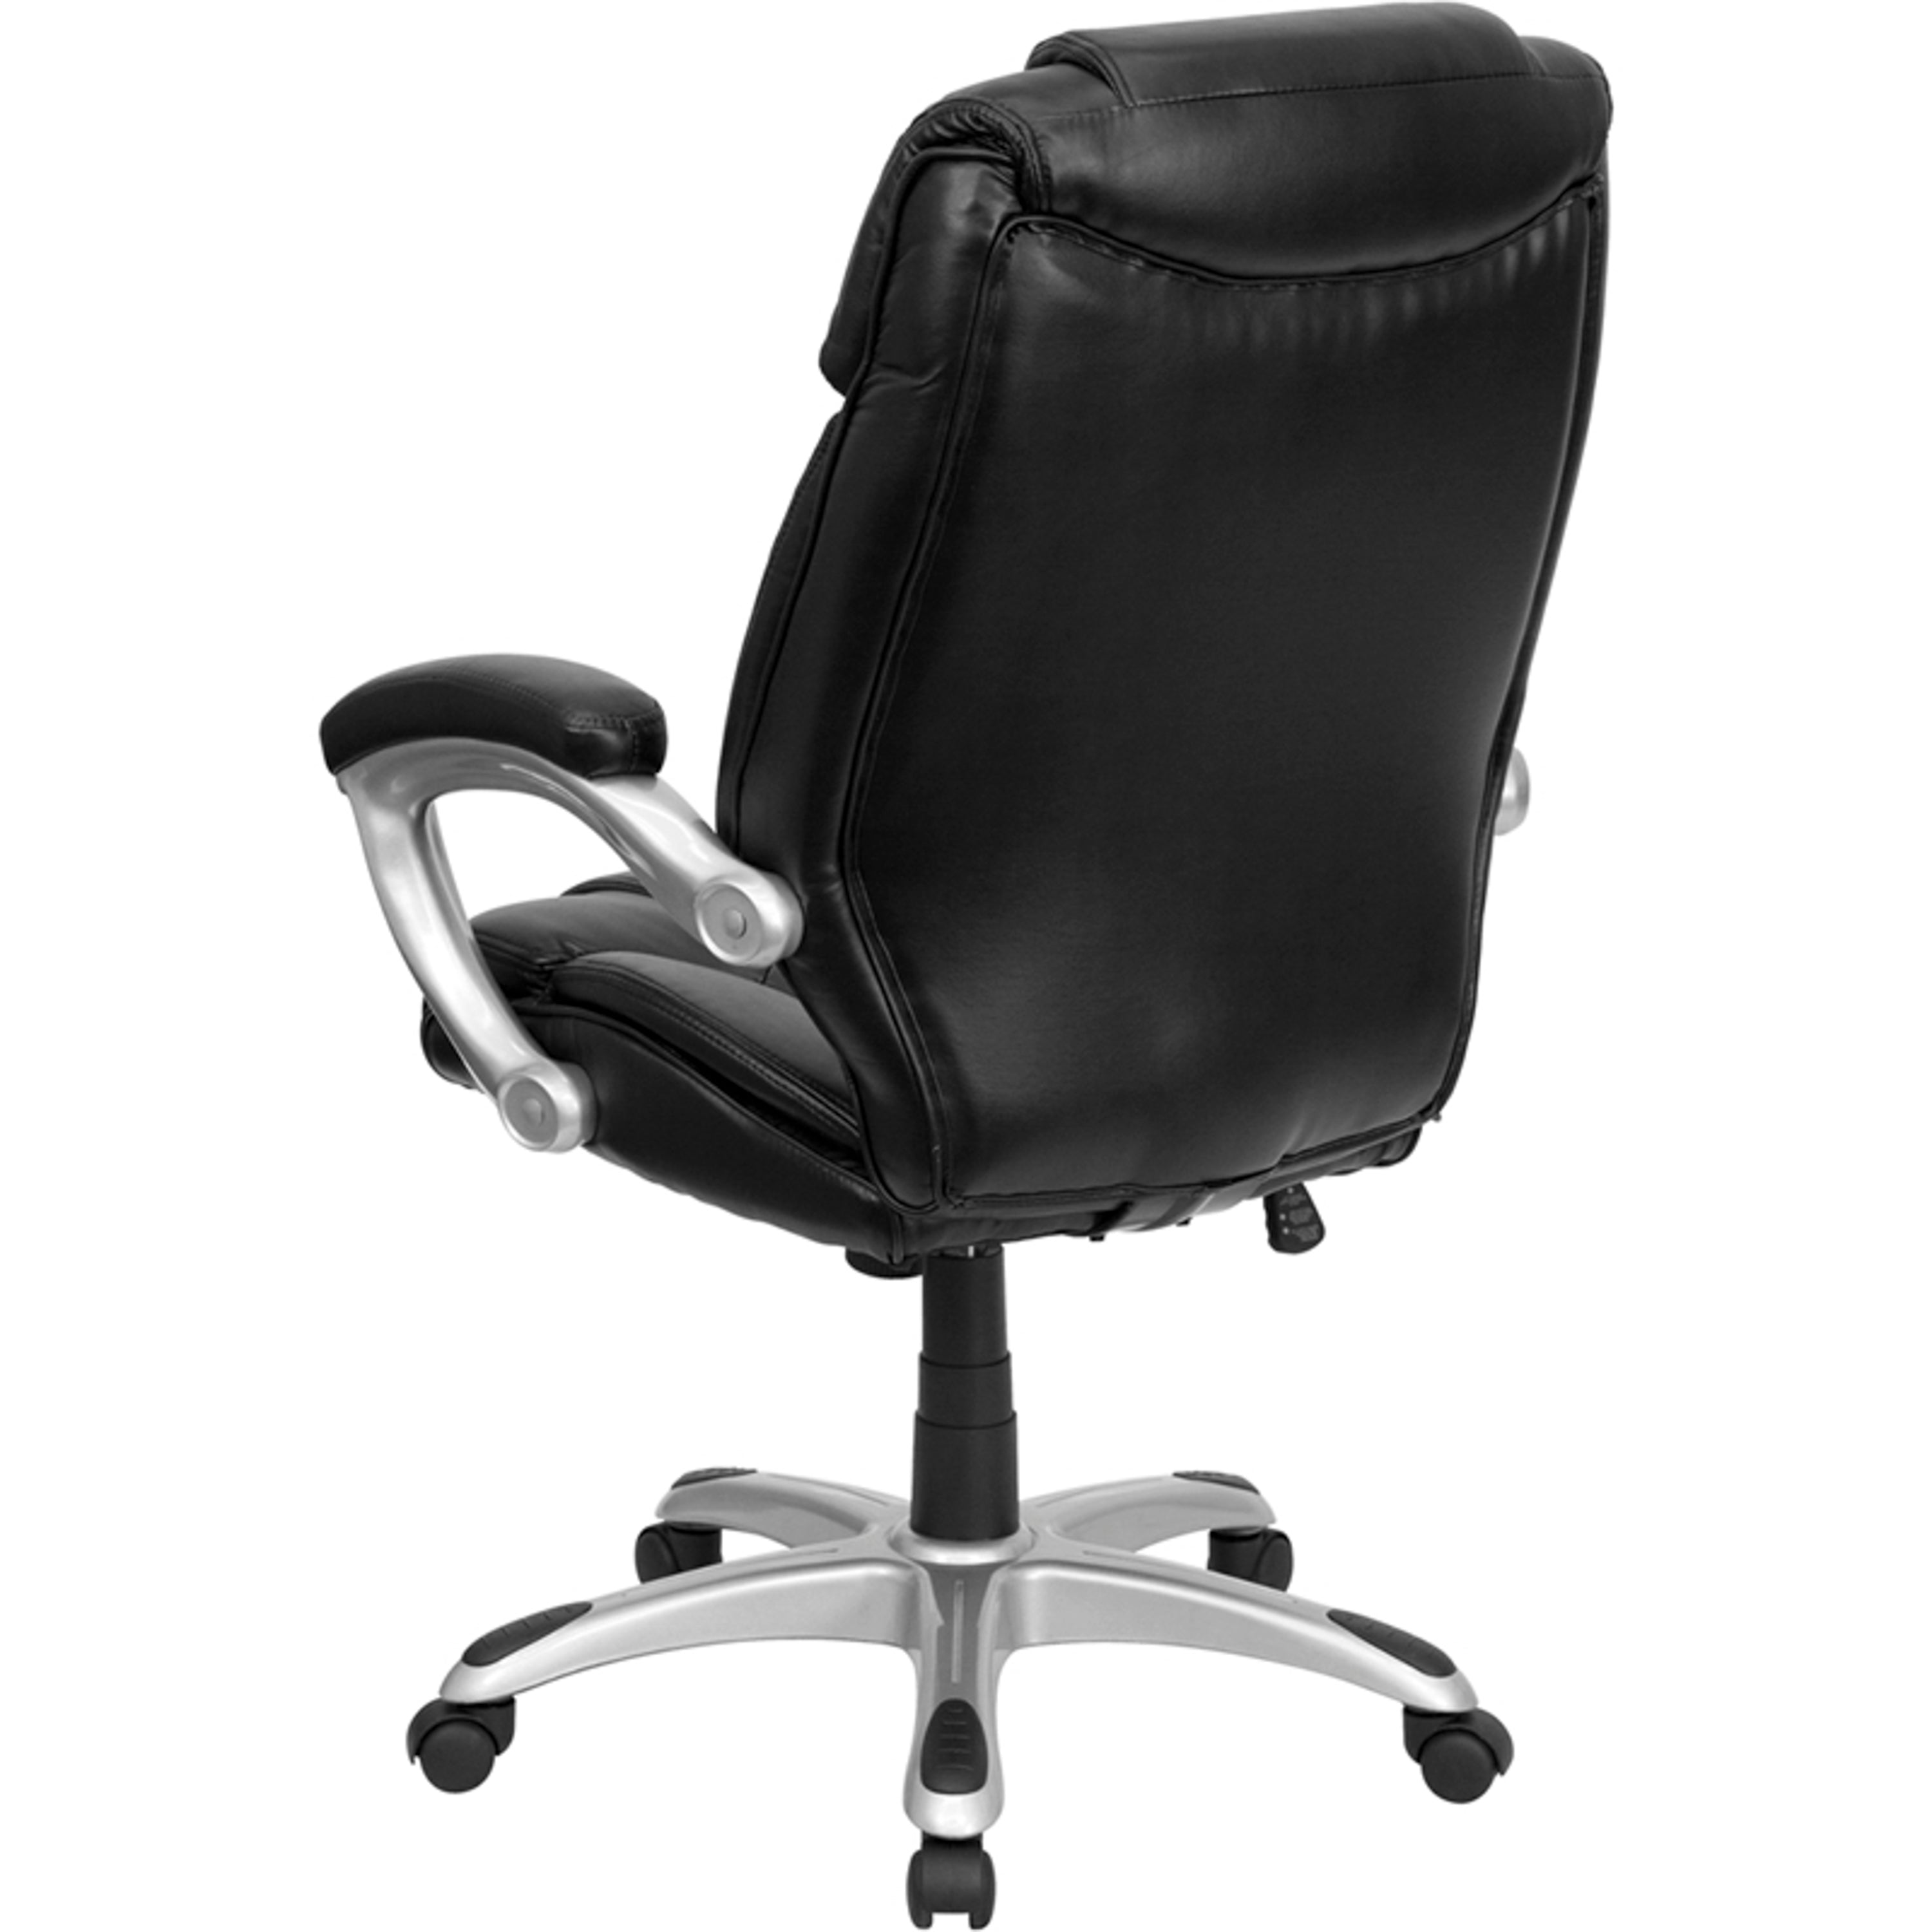 High Back LeatherSoft Layered Upholstered Executive Swivel Ergonomic Office Chair with Silver Nylon Base and Arms-Office Chair-Flash Furniture-Wall2Wall Furnishings